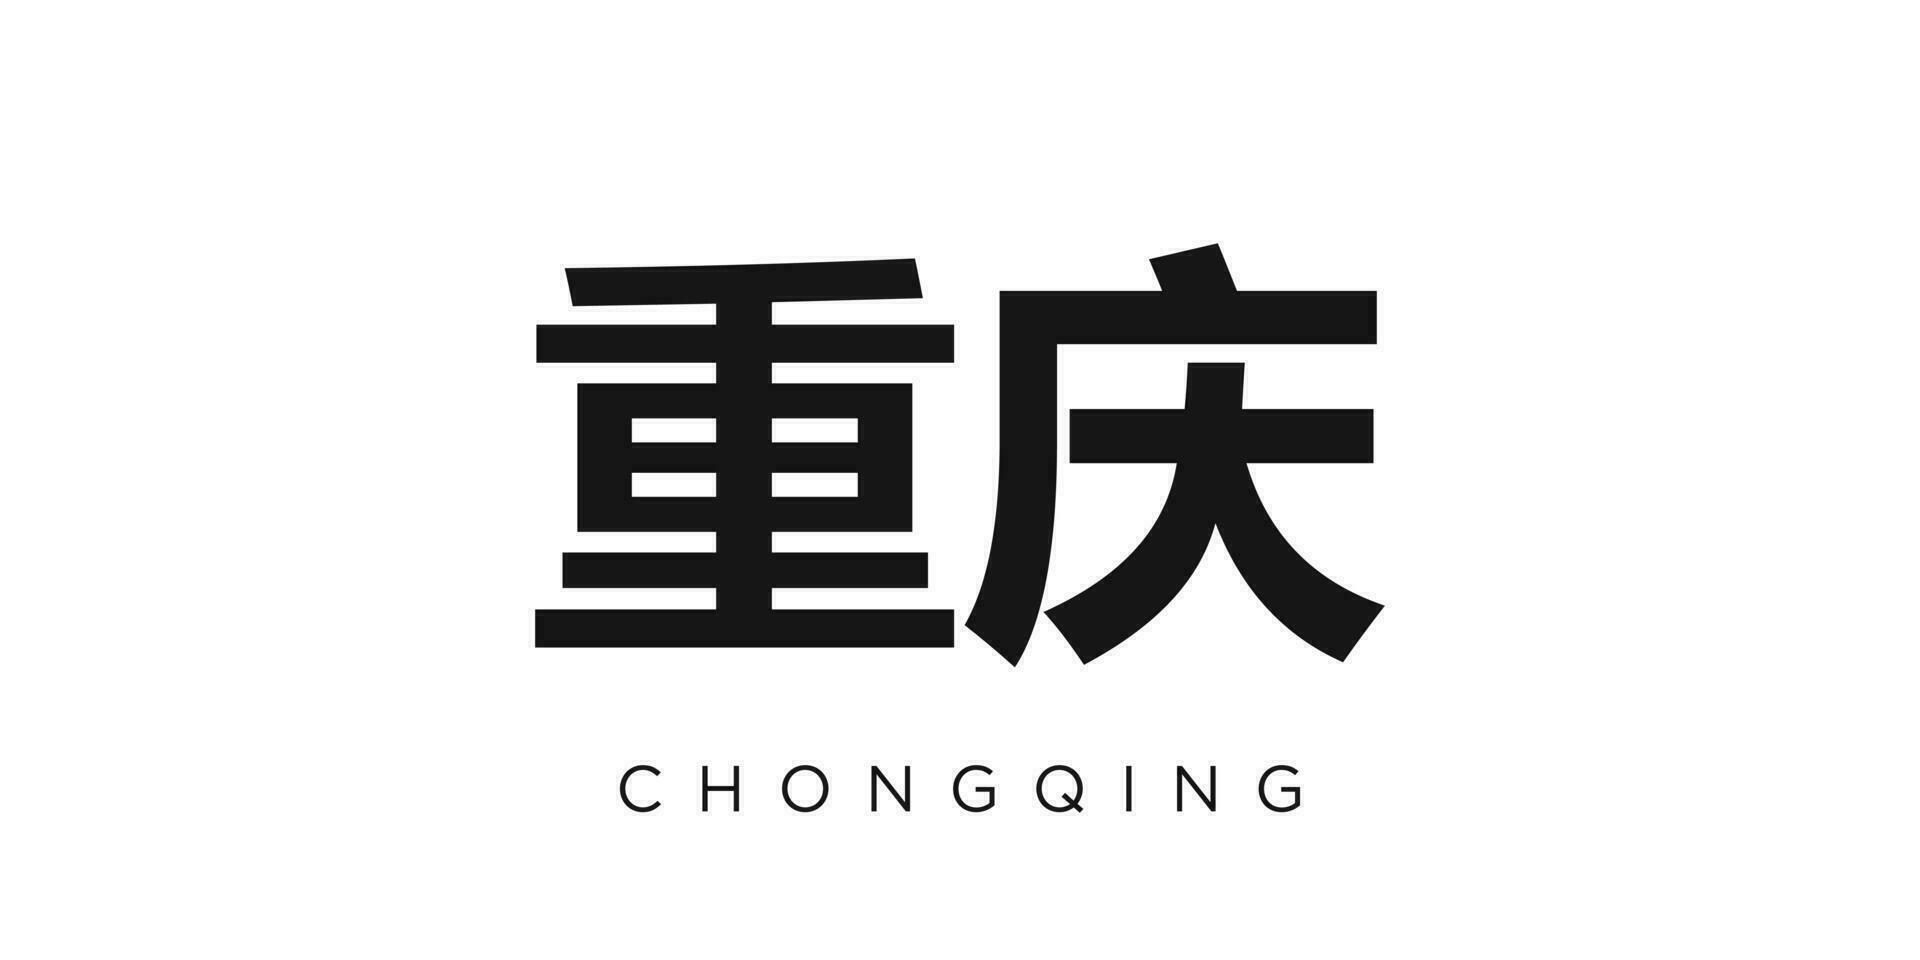 Chongqing in the China emblem. The design features a geometric style, vector illustration with bold typography in a modern font. The graphic slogan lettering.